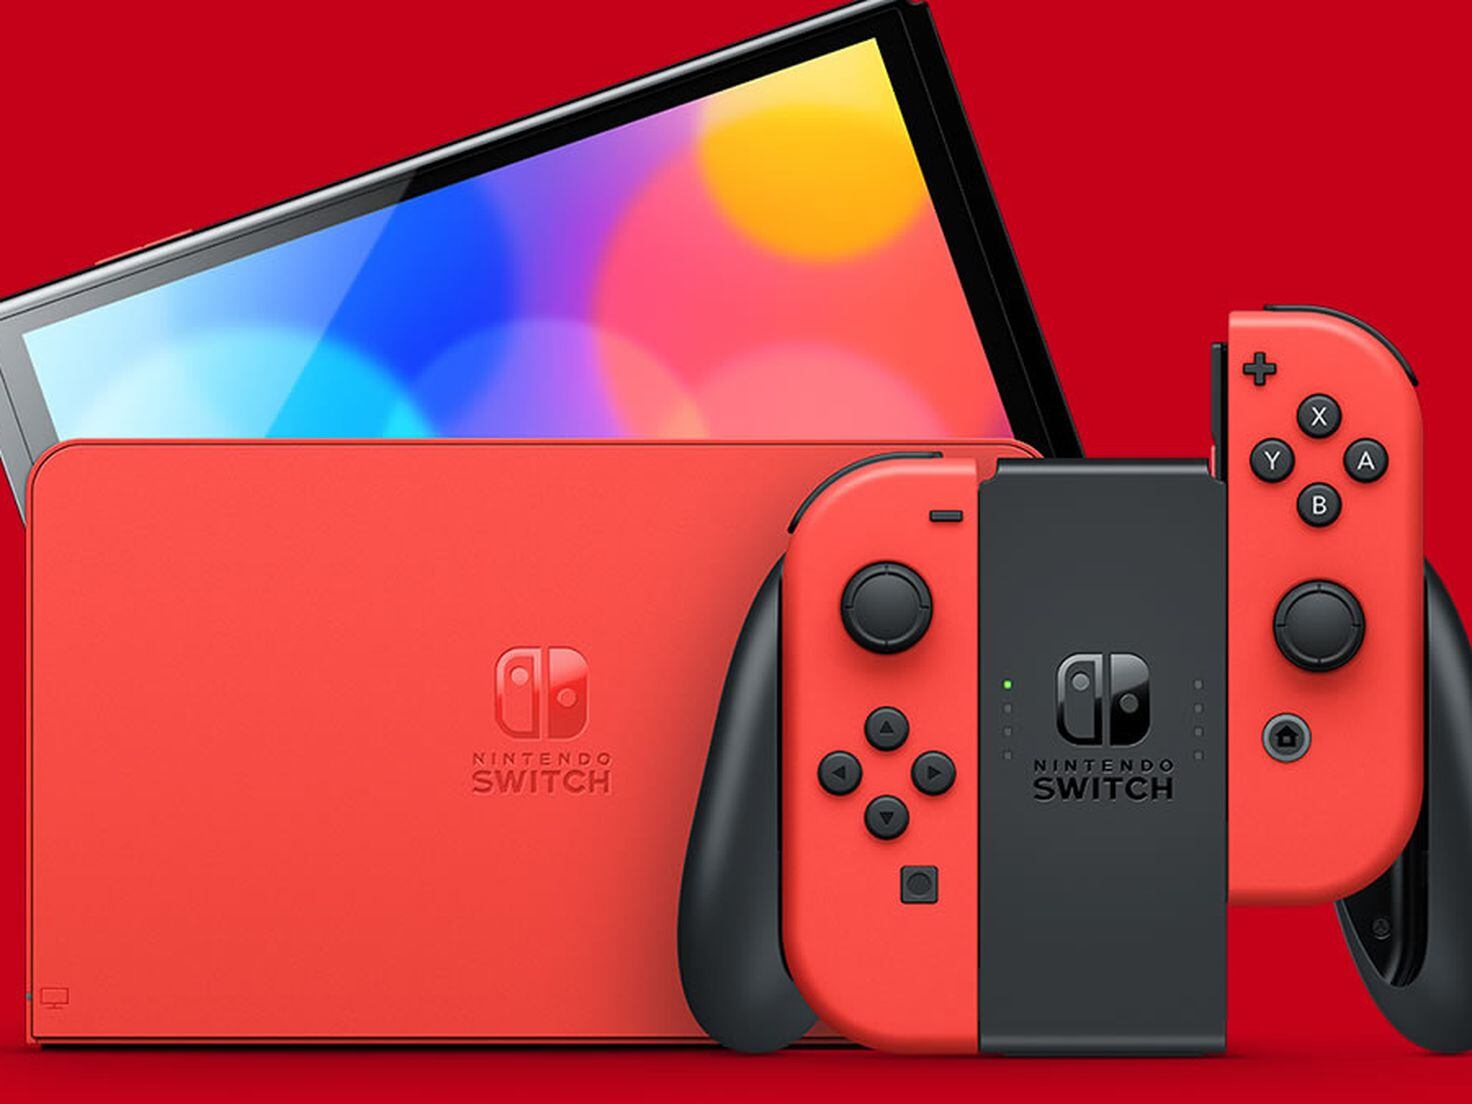 Nintendo Switch 2: Everything We Know About Nintendo's Next Console -  Nvidia Chips, Rumours